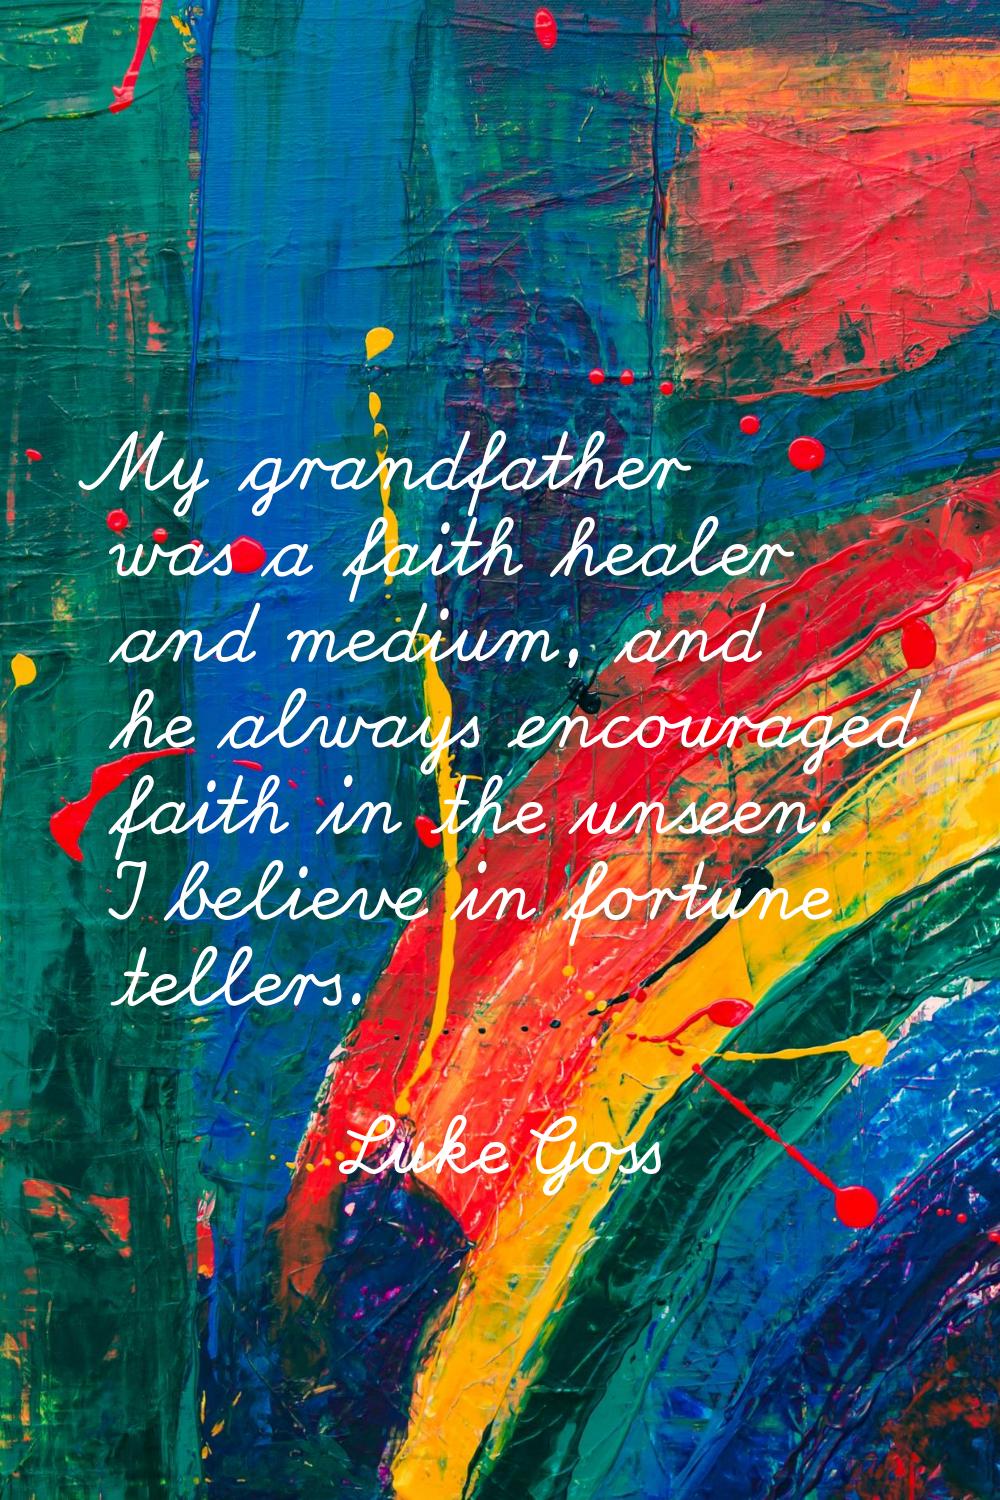 My grandfather was a faith healer and medium, and he always encouraged faith in the unseen. I belie